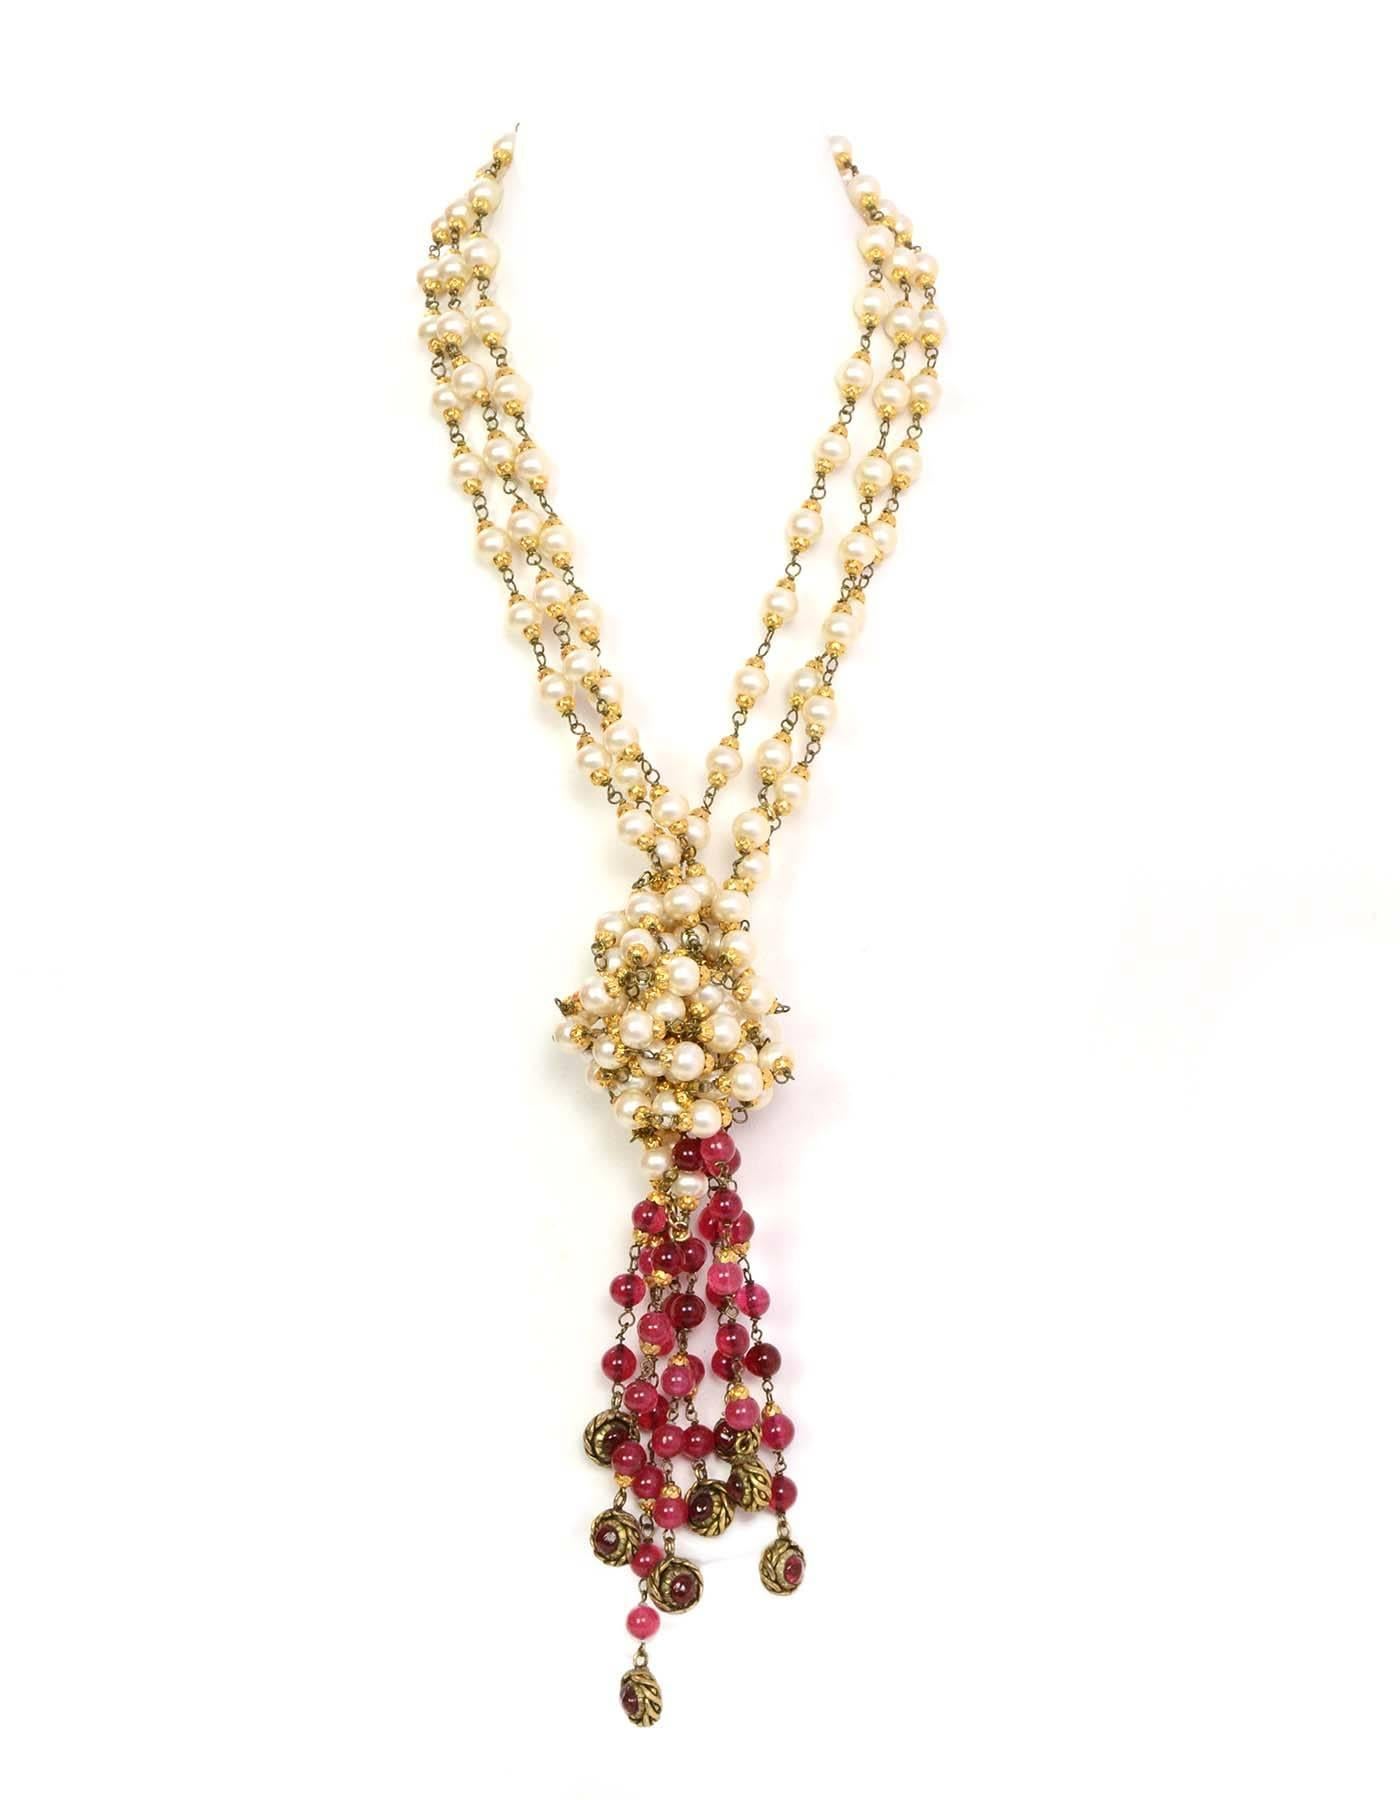 CHANEL Three Strand Long Faux Pearl Lariat Necklace W. Red Gripoix Beads 1984

Age: 1984
Made in France
Materials: faux pearls, red gripoix beads, gold cable accents, gold chain links.
Features triple strand long pearl necklace with four red